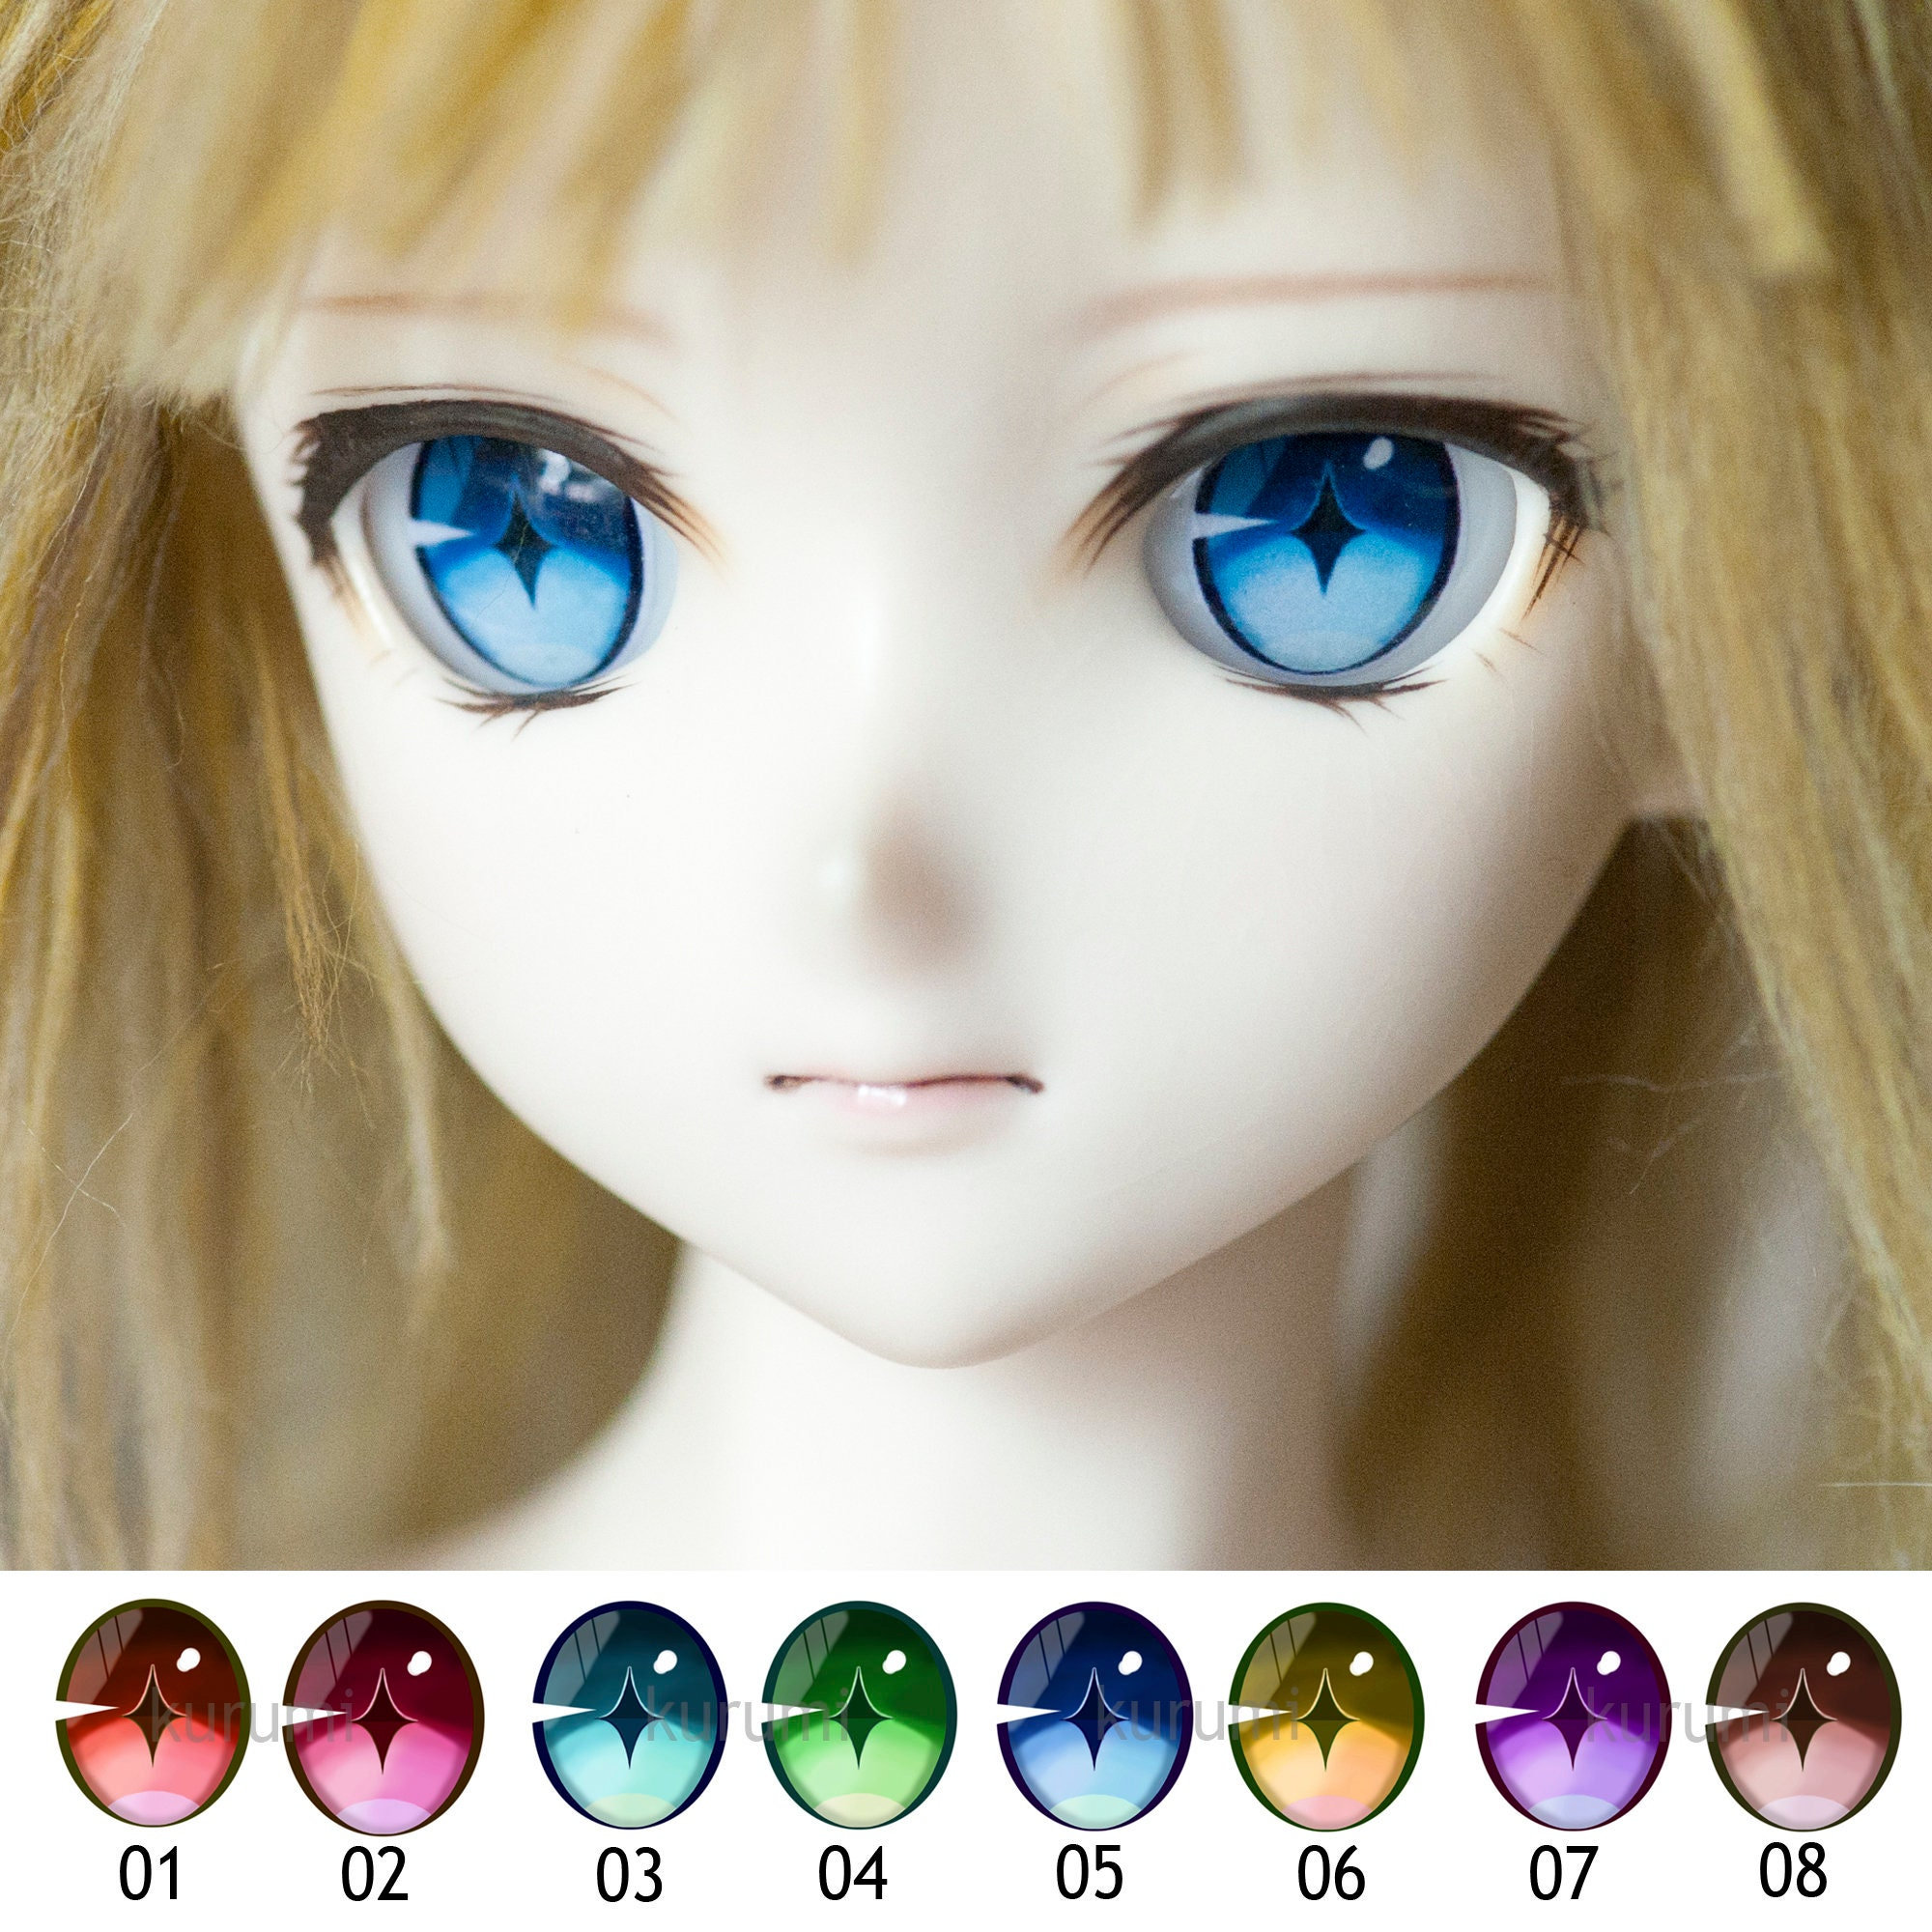 Doll Eyes 10/11/12/14/16/18mm Bjd Anime Doll Eyes Acrylic Fit for 1/3 & 1/4  & 1/6 & 1/8 Bjd Doll Change Makeup Eyes Accessories